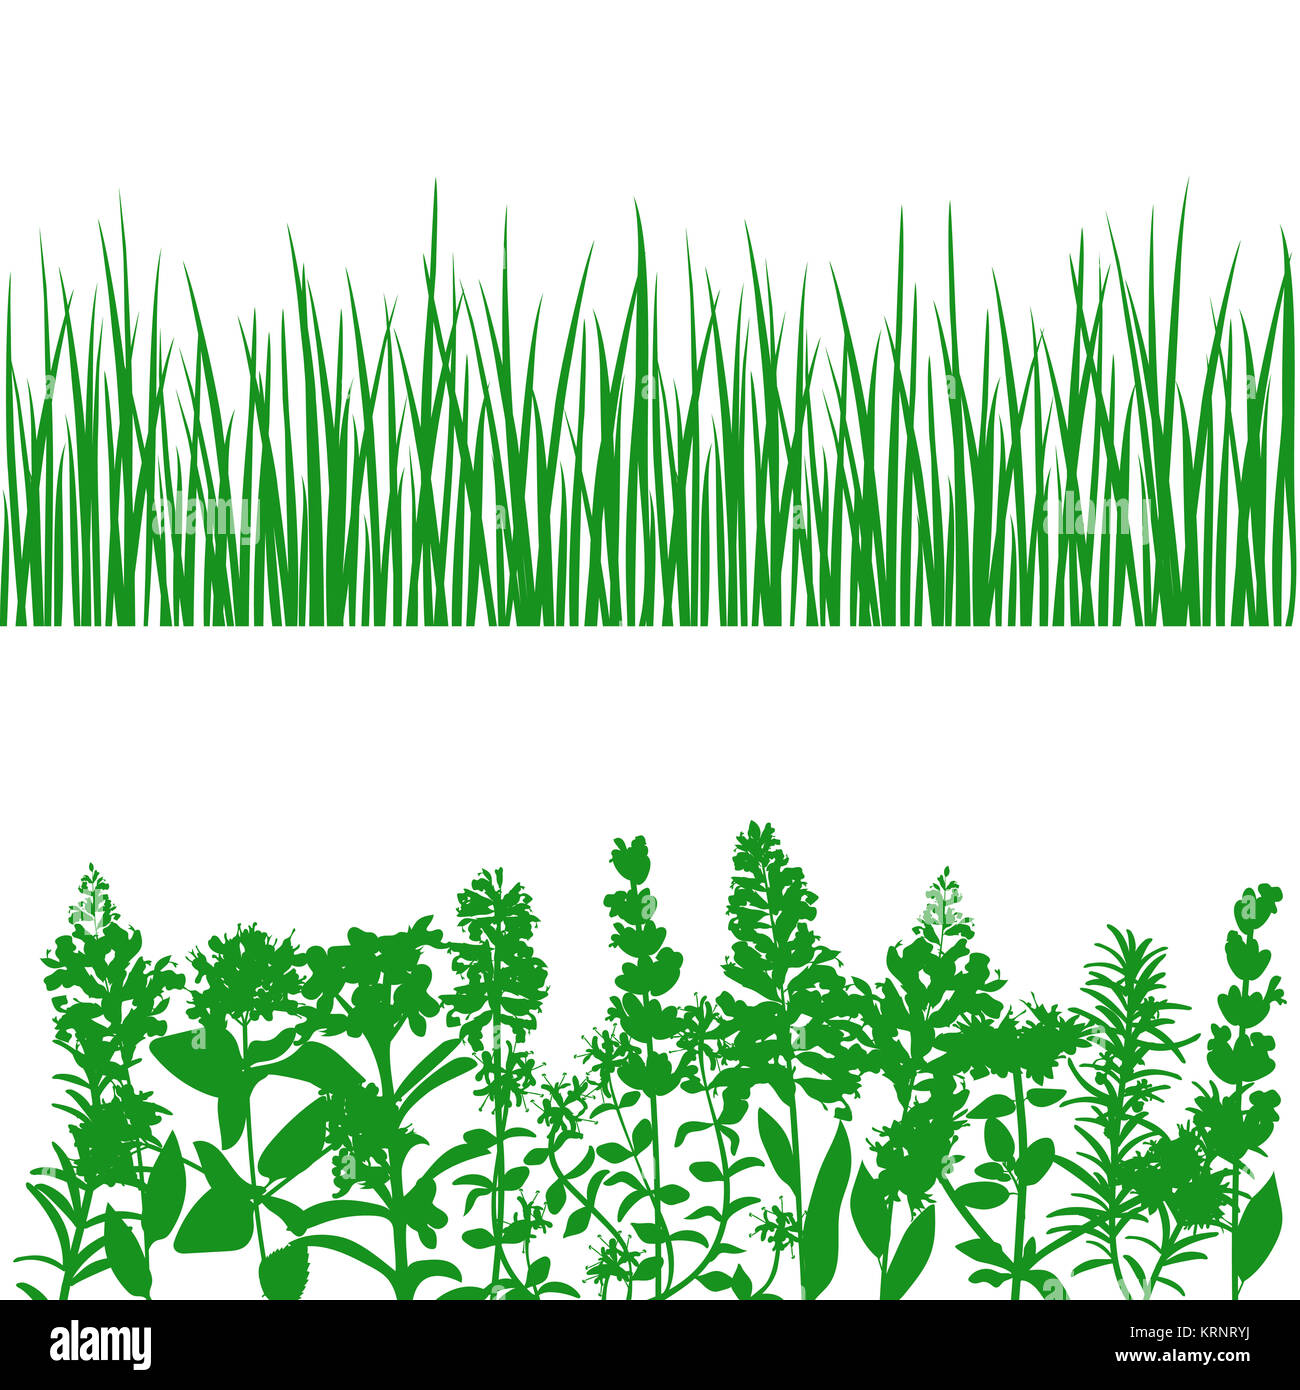 Grass and plants detailed silhouettes on white. Stock Photo